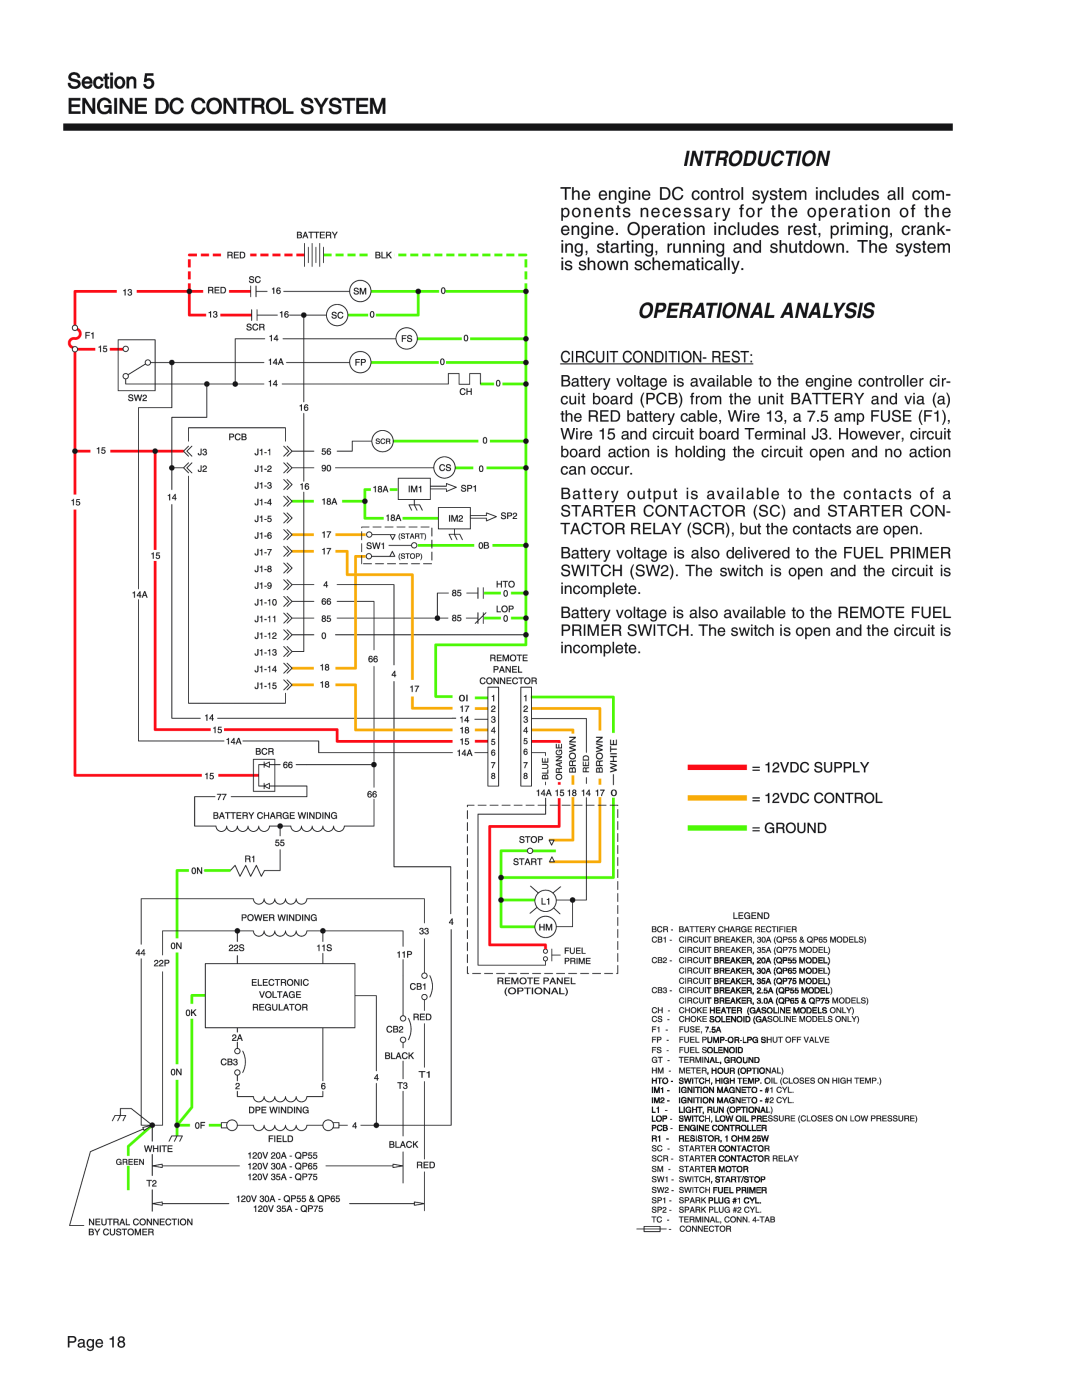 Generac Power Systems 65, 55, 75 manual Section ENGINE DC CONTROL SYSTEM, Introduction, Operational Analysis 